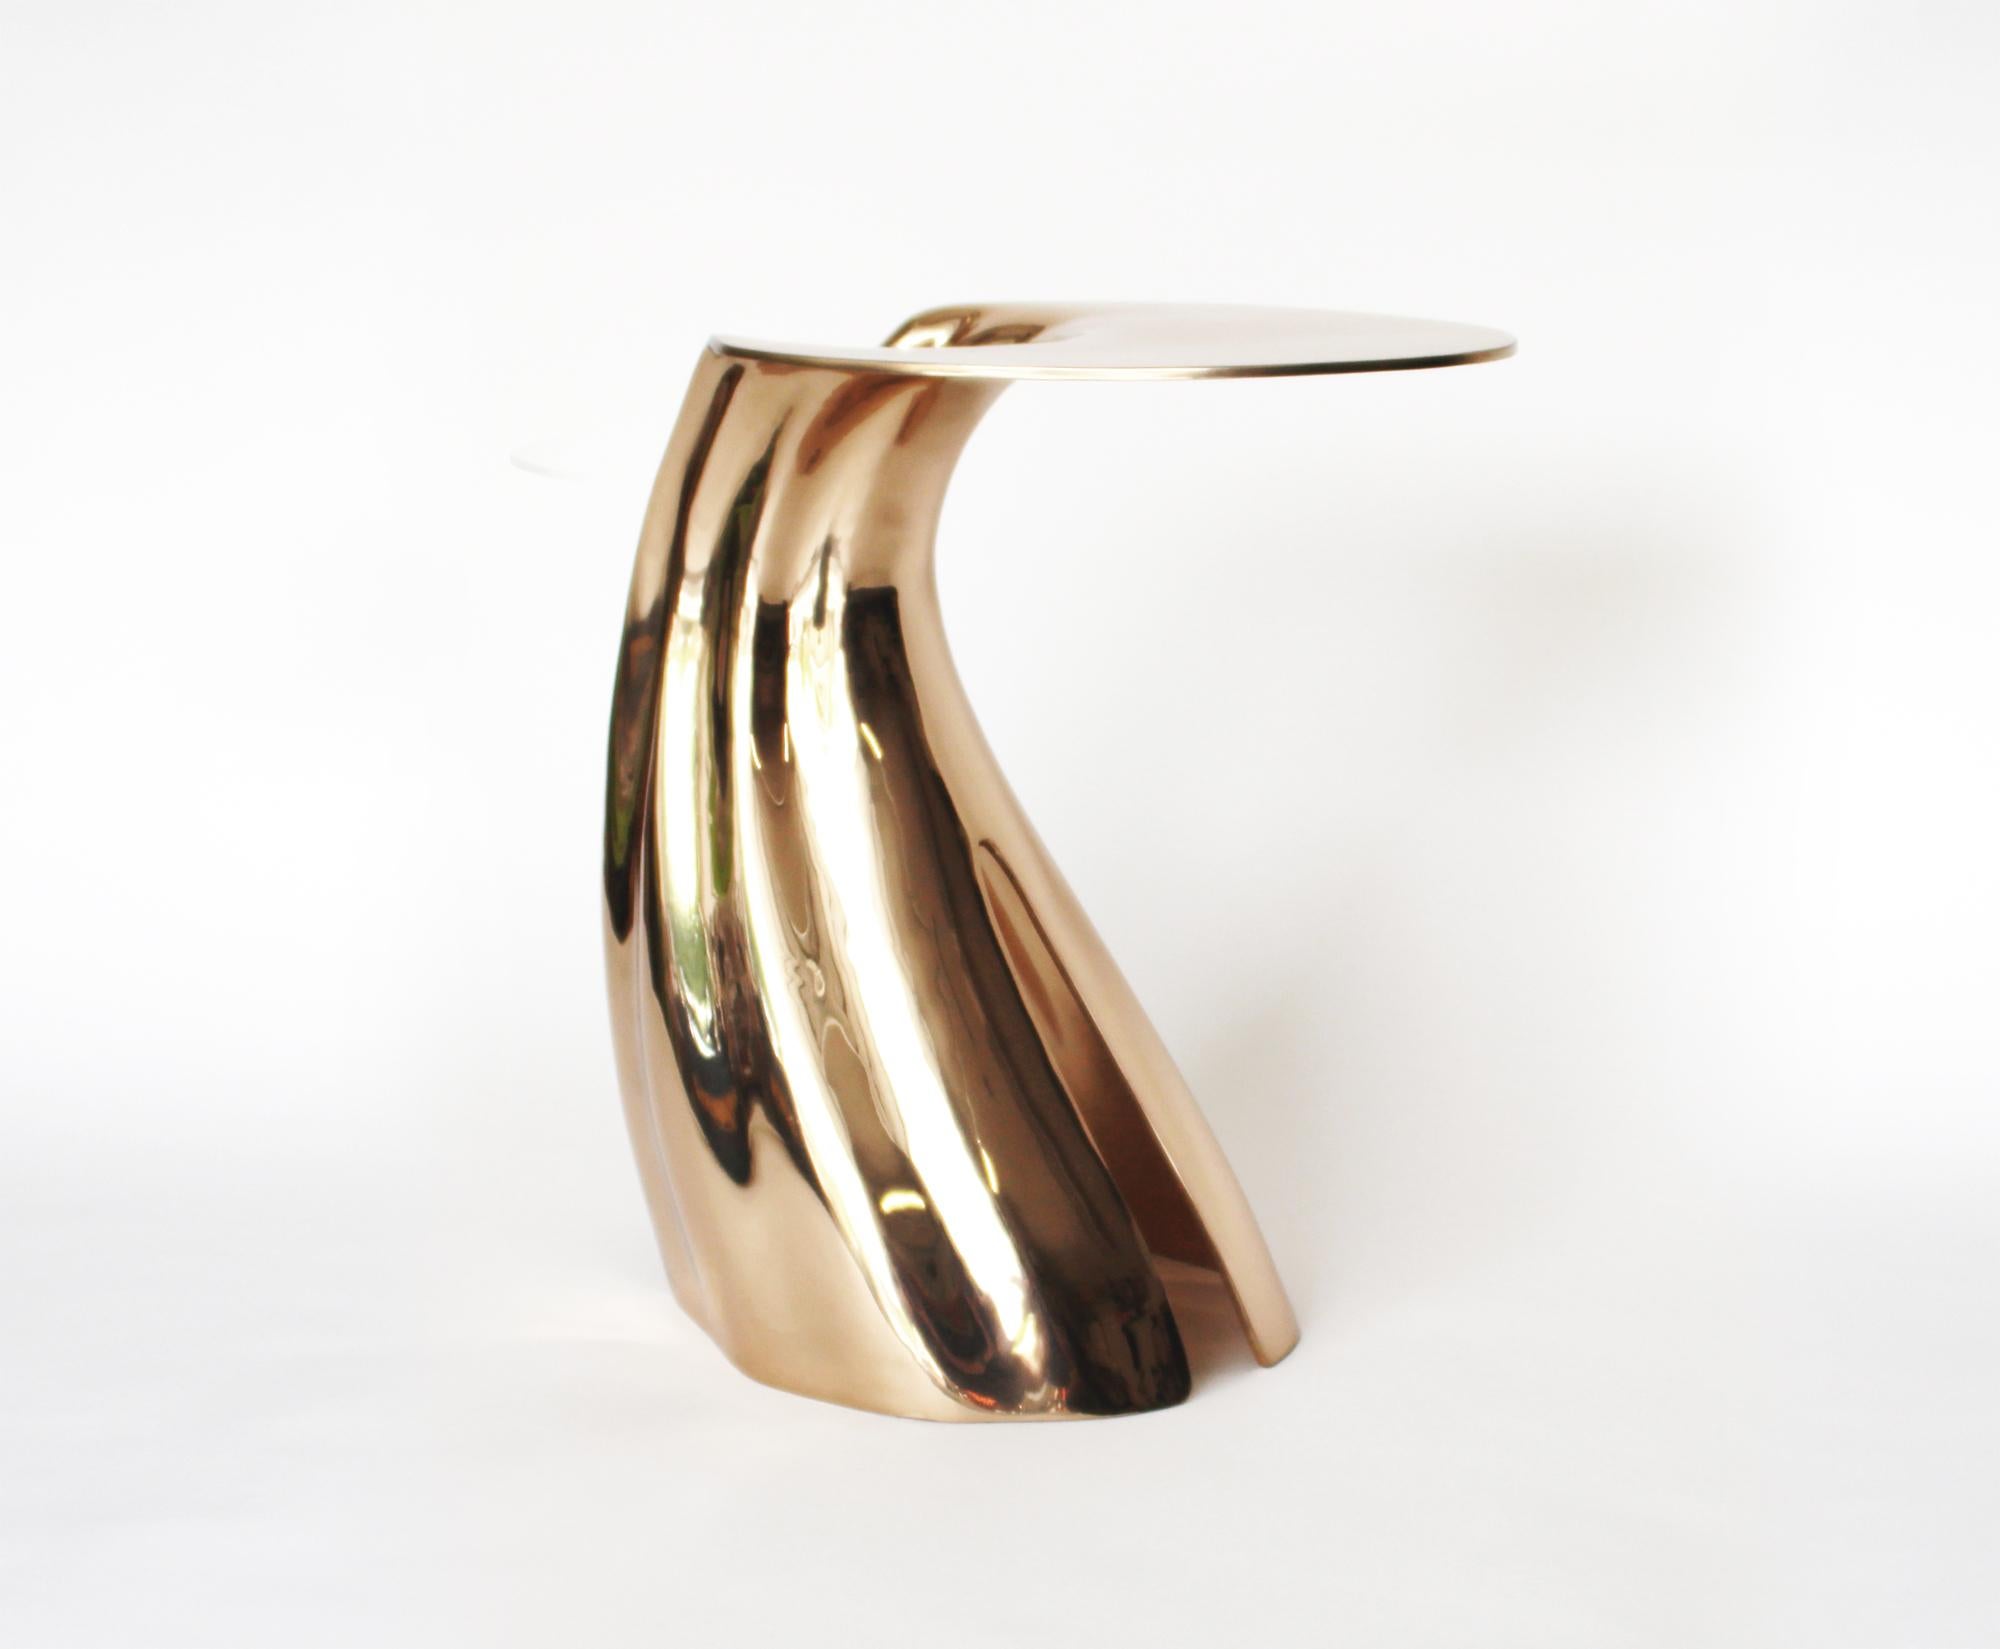 Inflection Table - Polished Bronze Design by Michael Sean Stolworthy For Sale 1